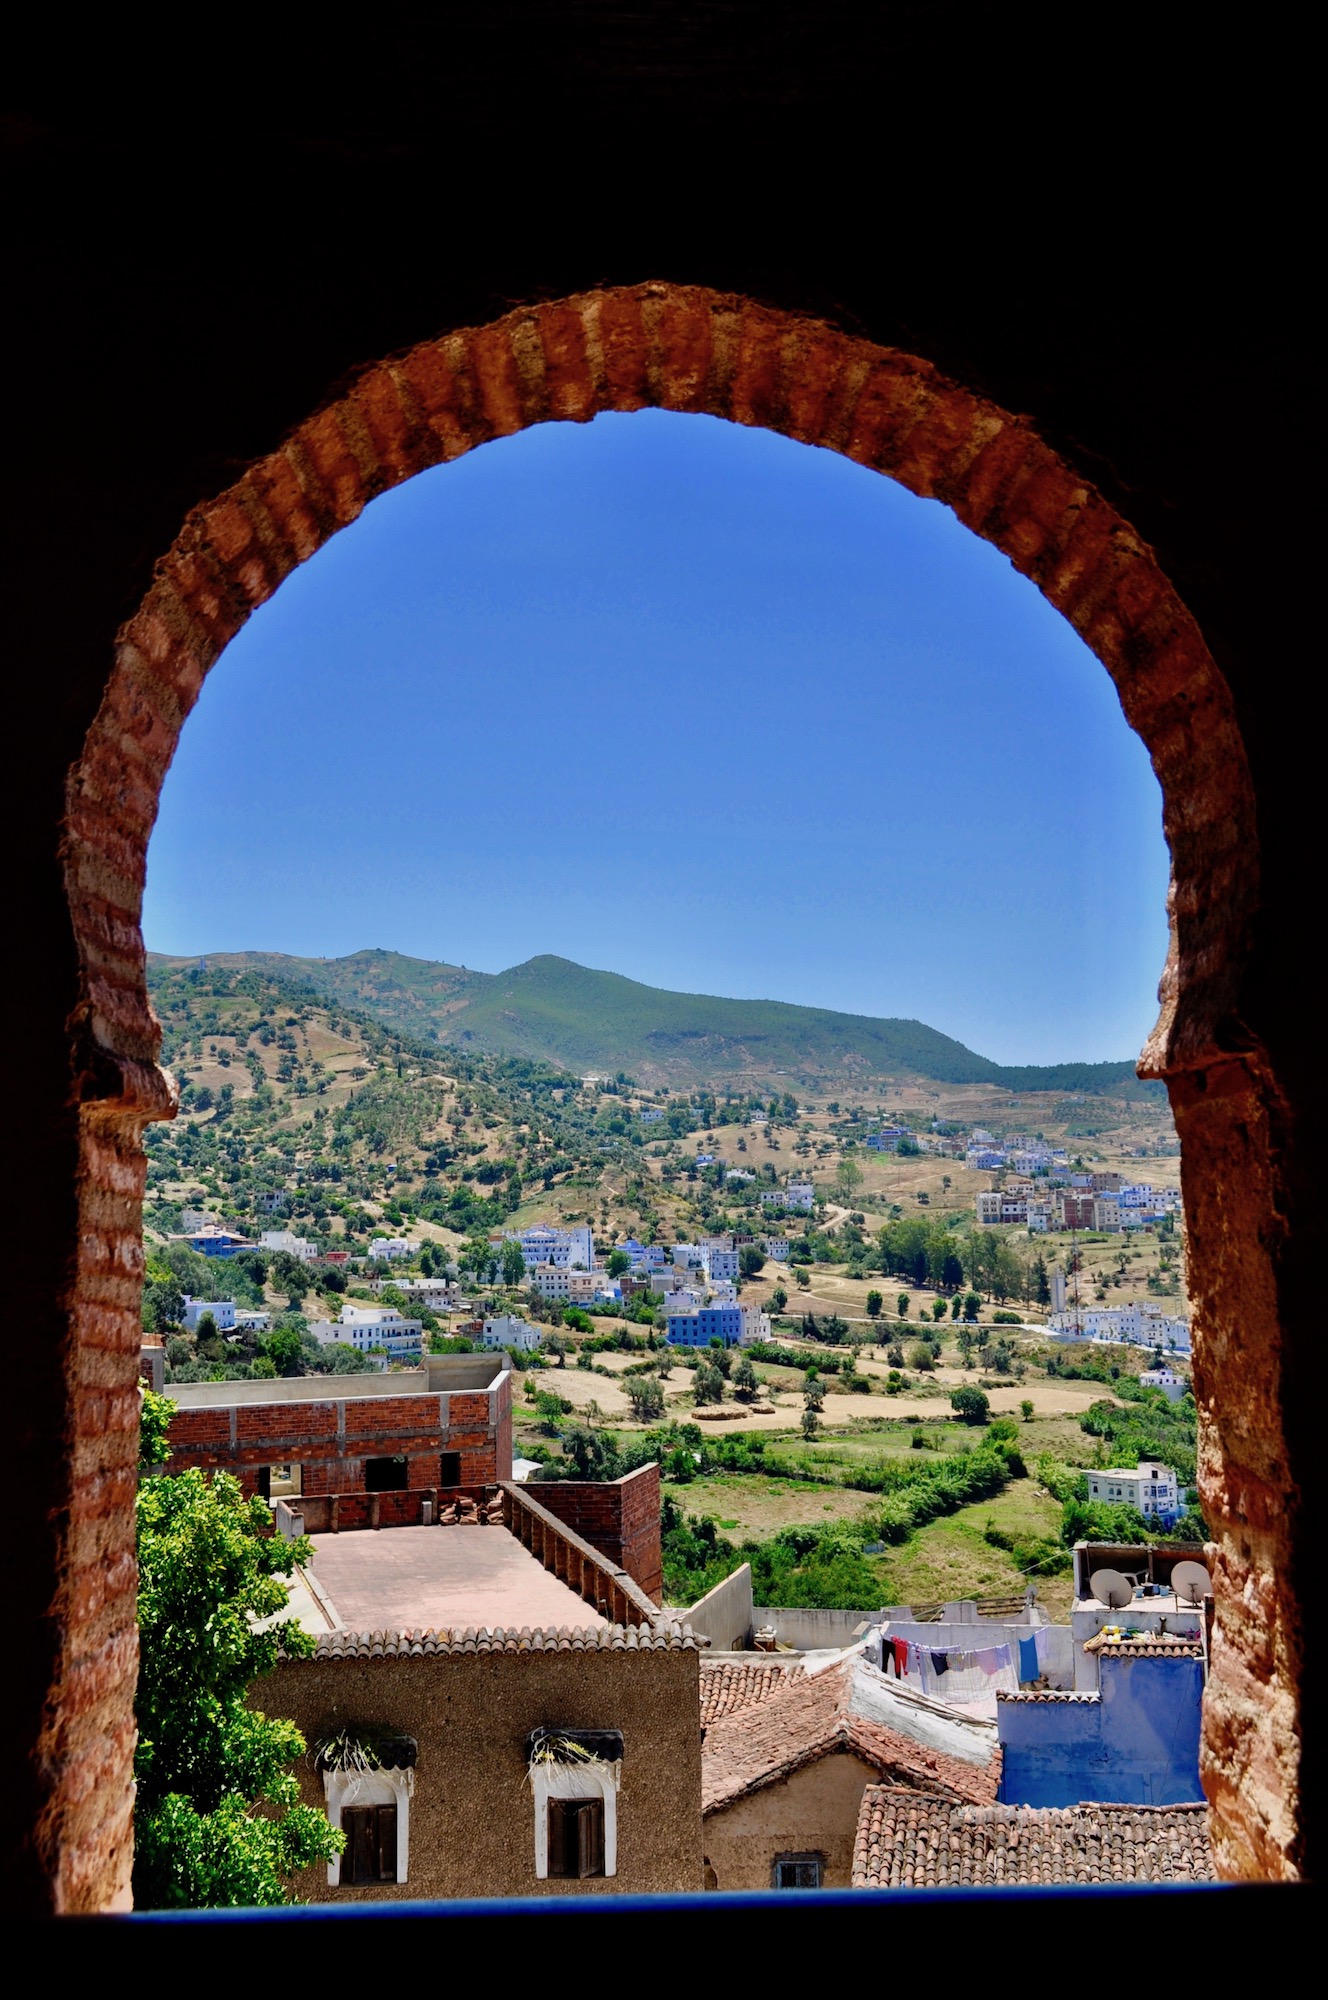 Touring Ancient Fez, Morocco